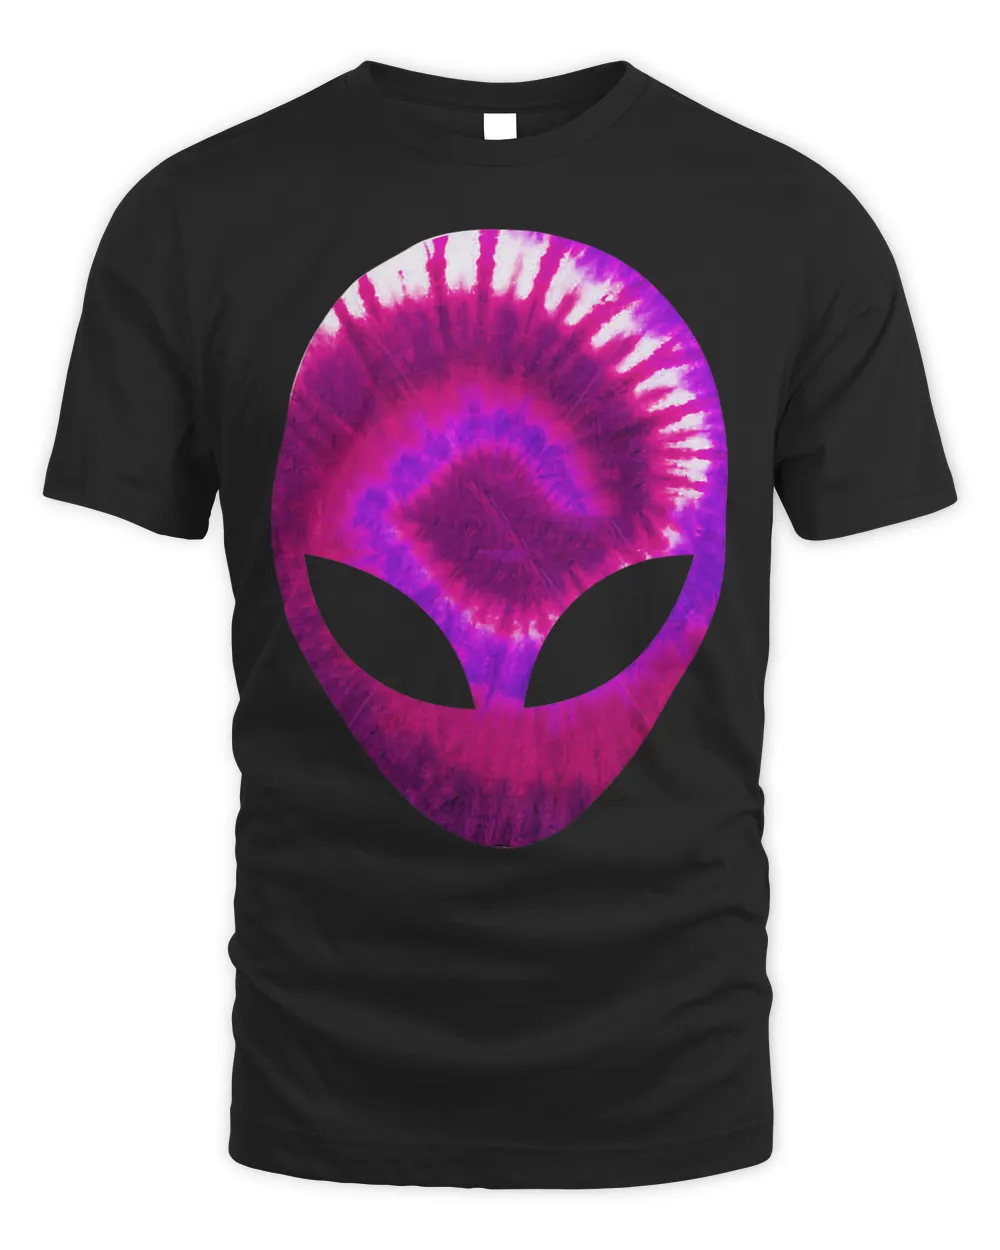 Aliens Head Rave Extraterrestrial Martian 2Rave Techno Pink